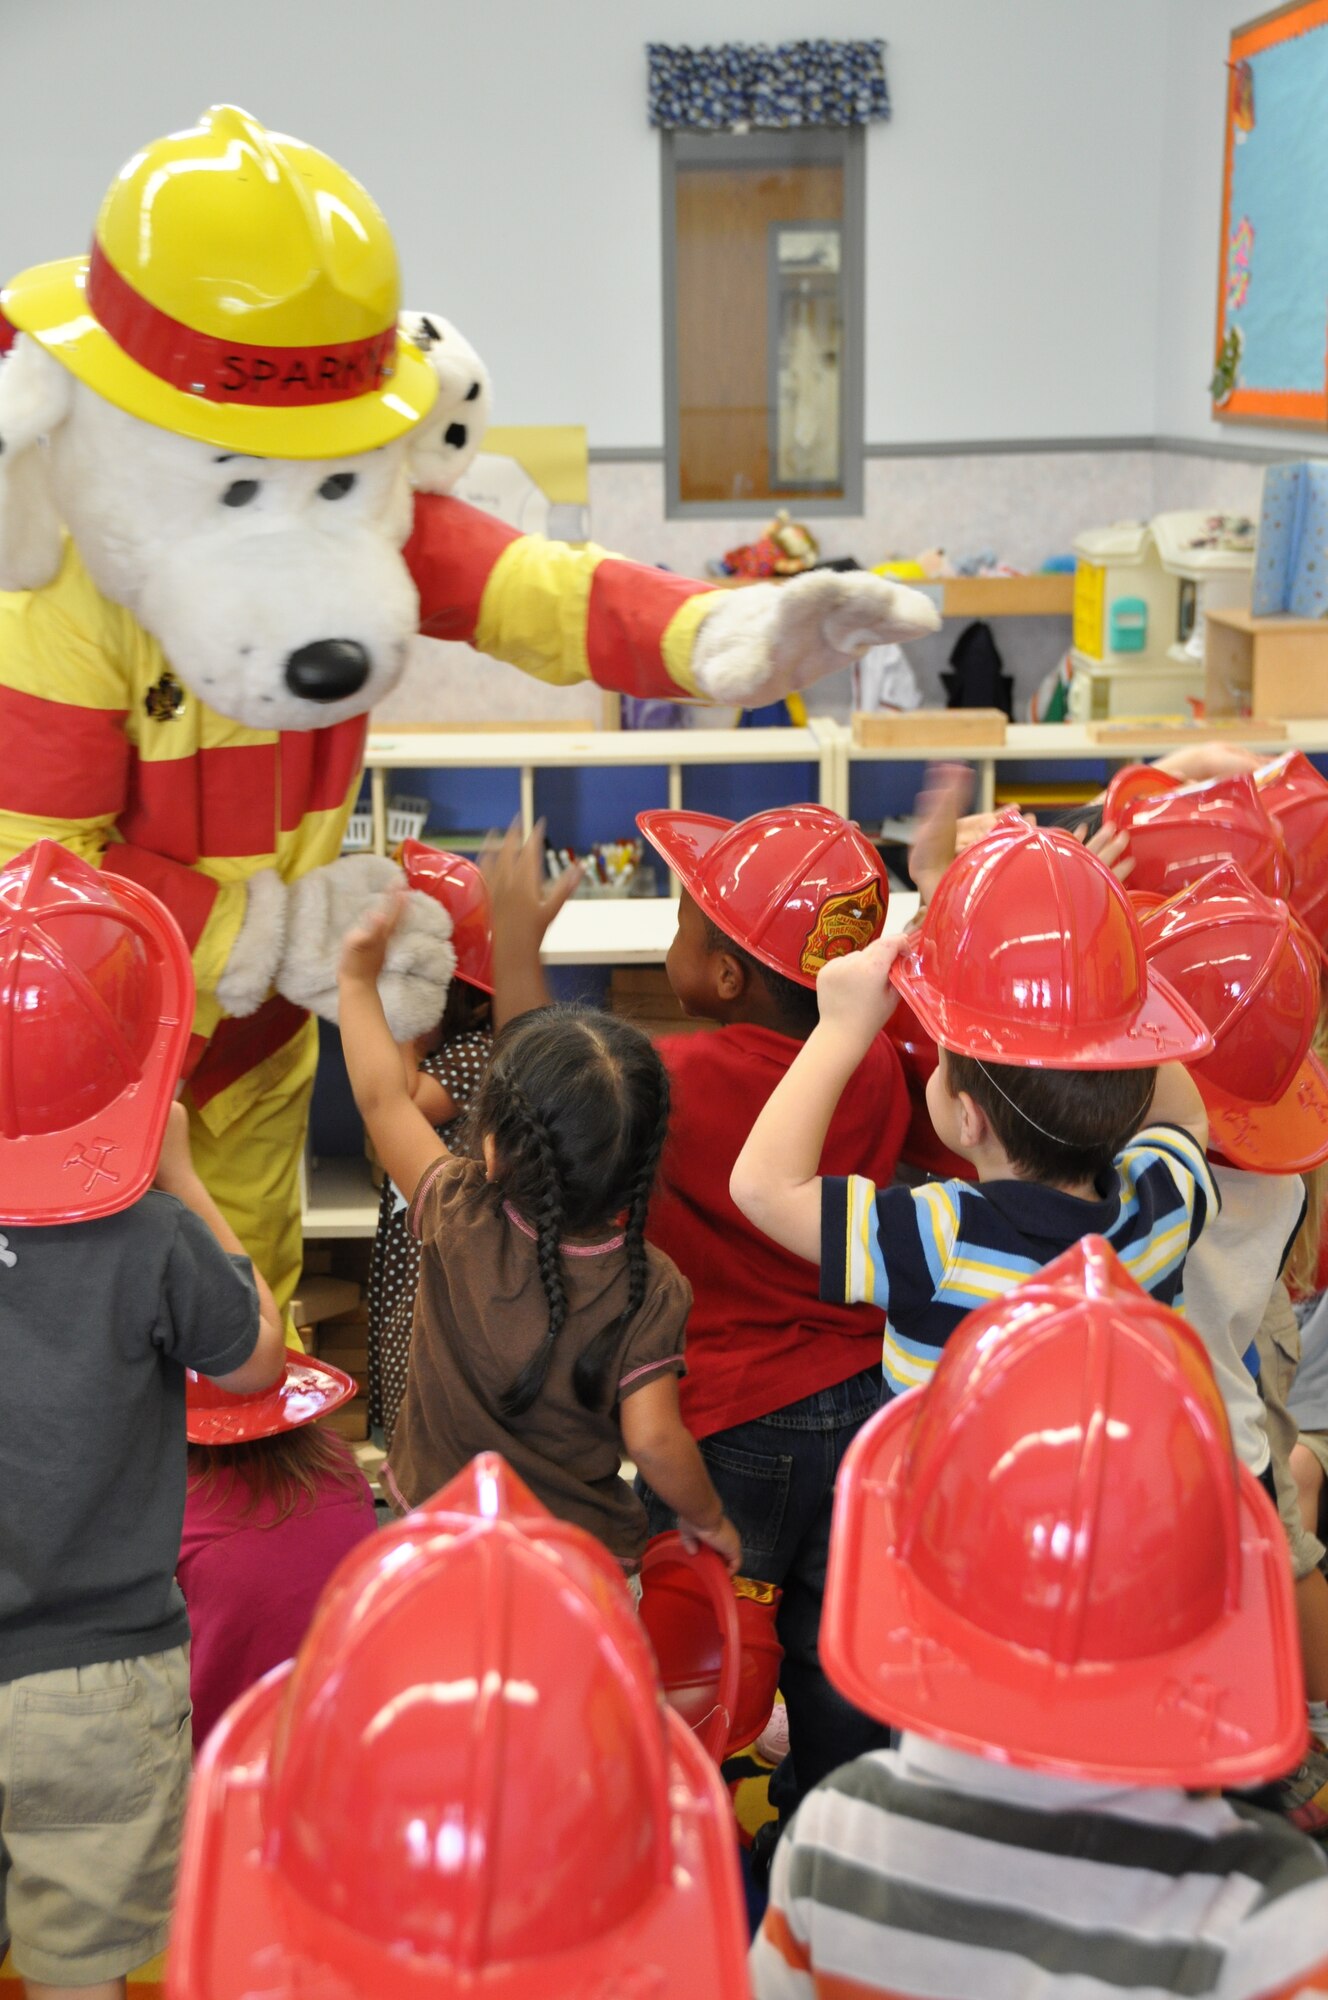 Sparky the fire dog, visits a group of children at the Child Development Center Oct. 8 to talk about National Fire Prevention Week.  National Fire Prevention Week 2009 is from Oct. 4 to Oct. 10, and this year’s theme focuses on burn awareness and keeping homes safe from the leading causes of home fires.  (U.S. Air Force photo/Airman 1st Class Veronica McMahon)